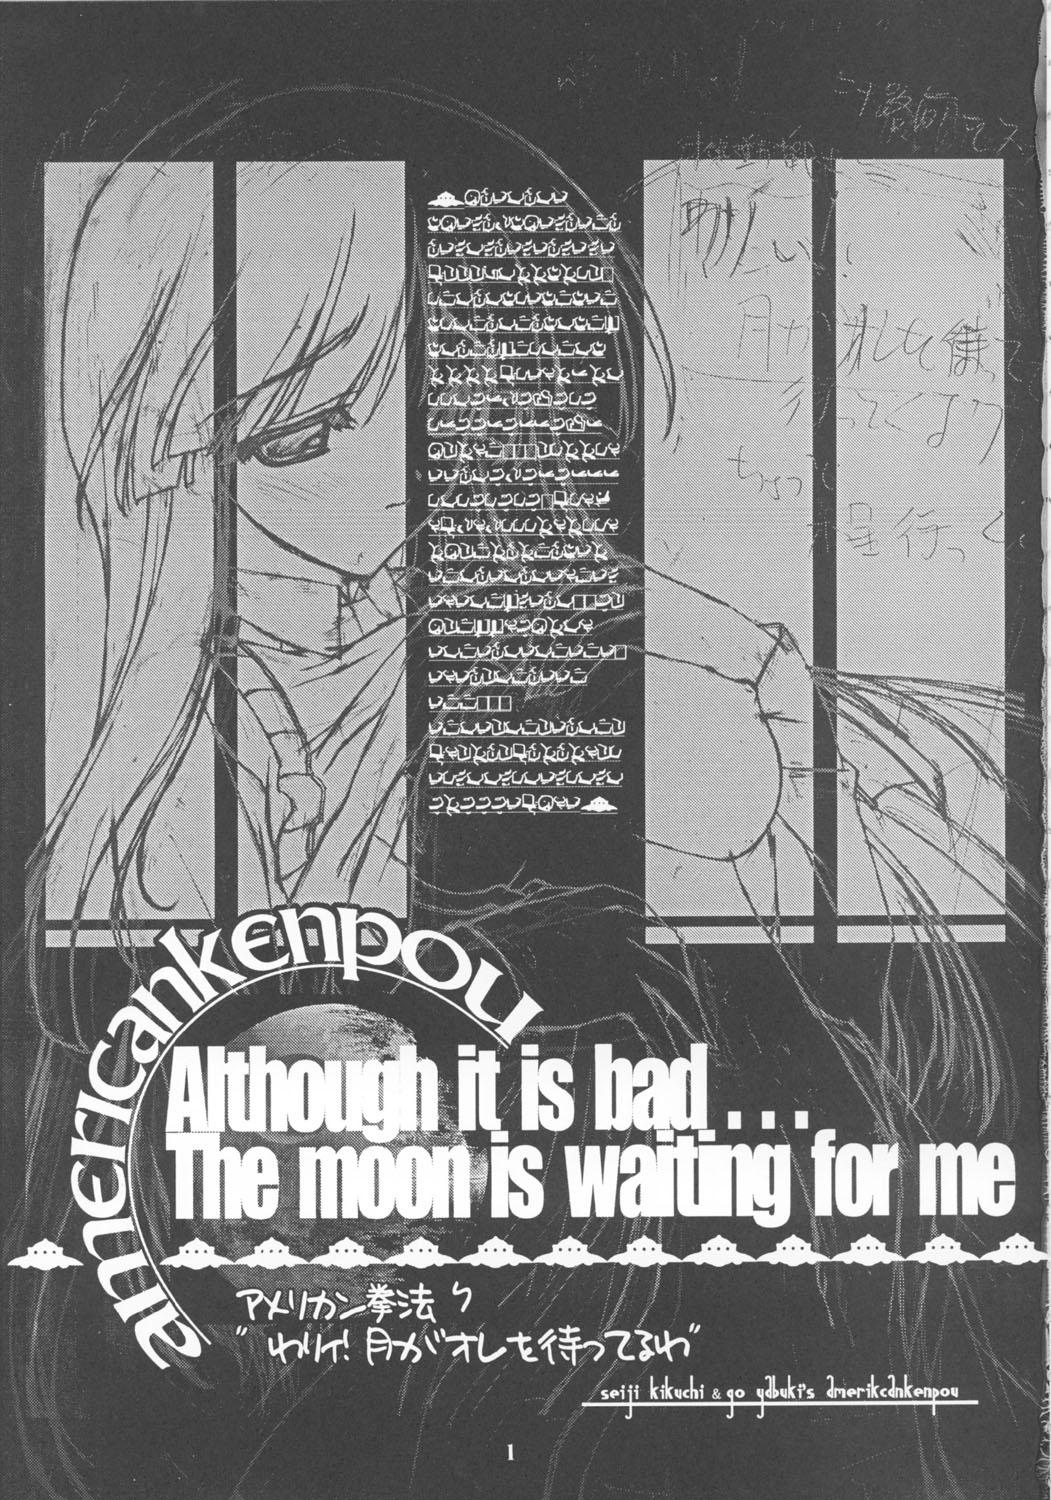 Pussy Orgasm Warii! Tsuki ga Ore wo Matteruwa ～Although it is bad...The moon is waiting for me～ - Final fantasy x-2 Gad guard Mature - Page 2